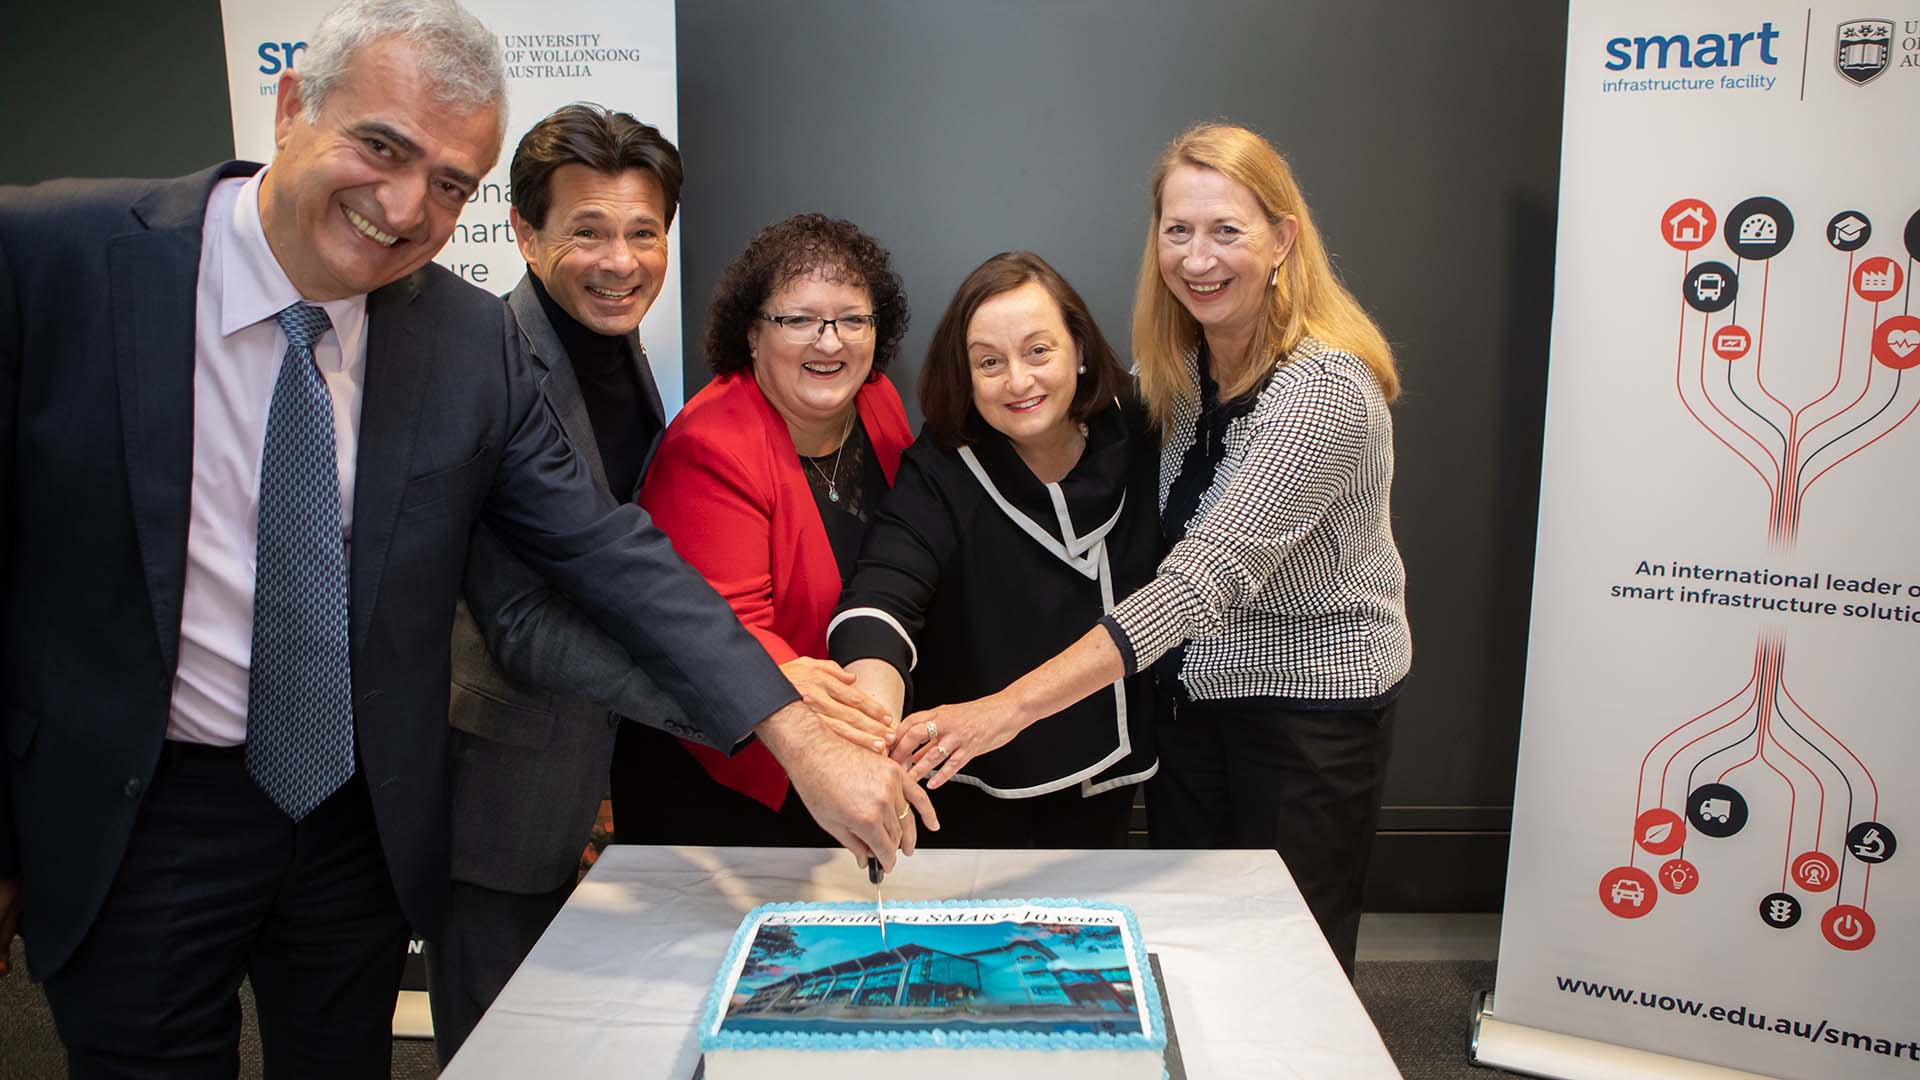 Faculty of Engineering and Information Sciences Senior Professor Gursel Alici, SMART Infrastructure Facility Director Senior Professor Pascal Perez, SMART Infrastructure Facility Chief Operating Officer Tania Brown, Vice-Chancellor Professor Patricia M. Davidson, and Member for Cunningham Sharon Bird MP